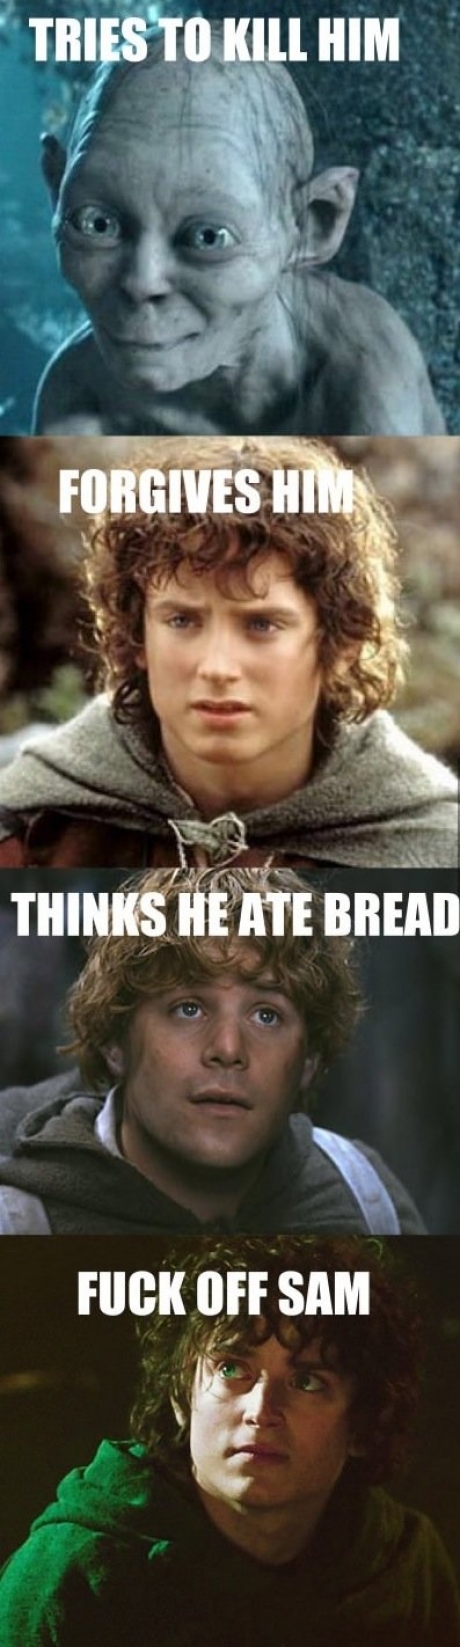 Getting real tired of your sh*t Mr Frodo